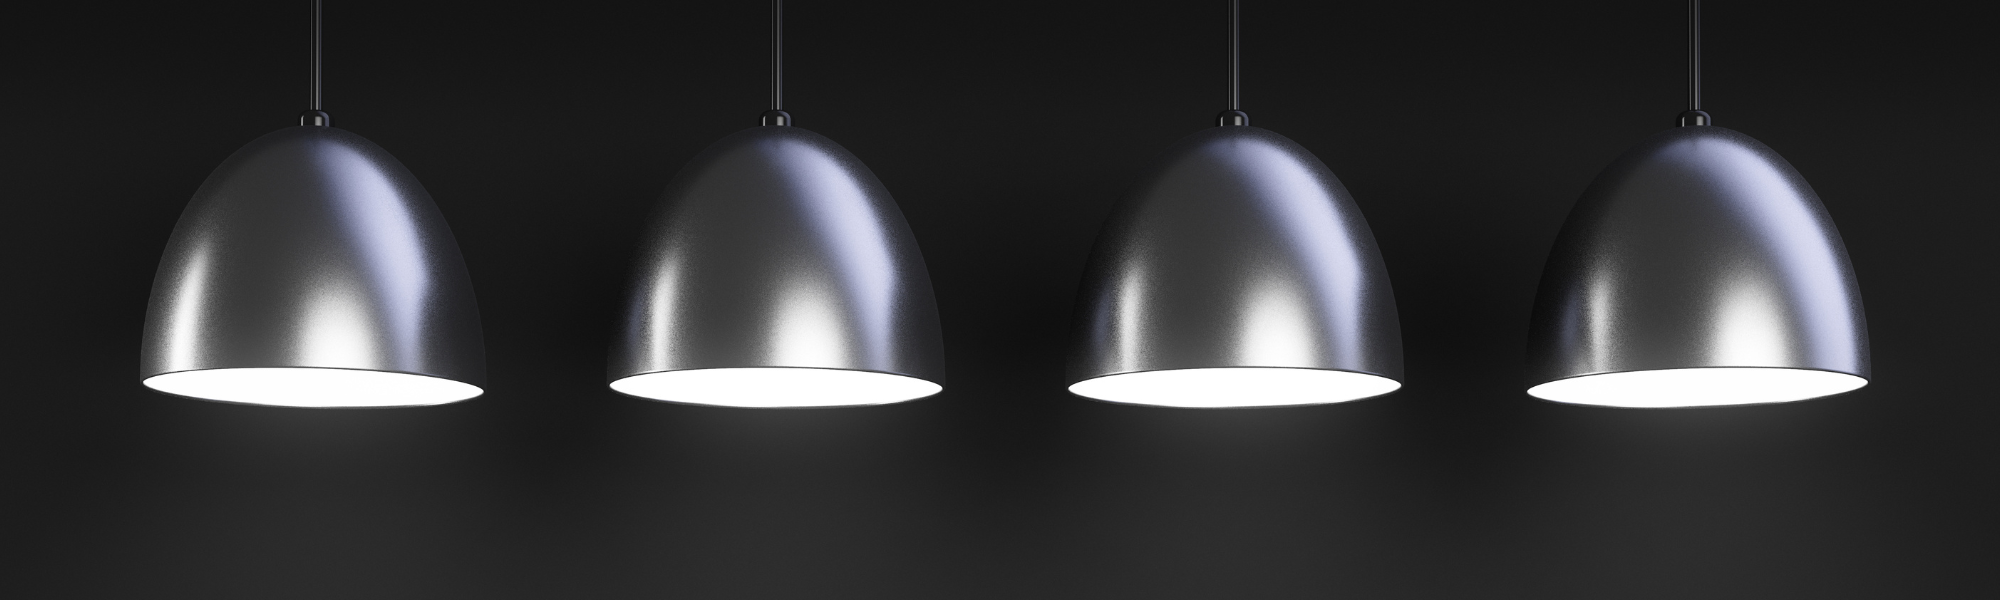 4 ceiling lamps lit on a dark background